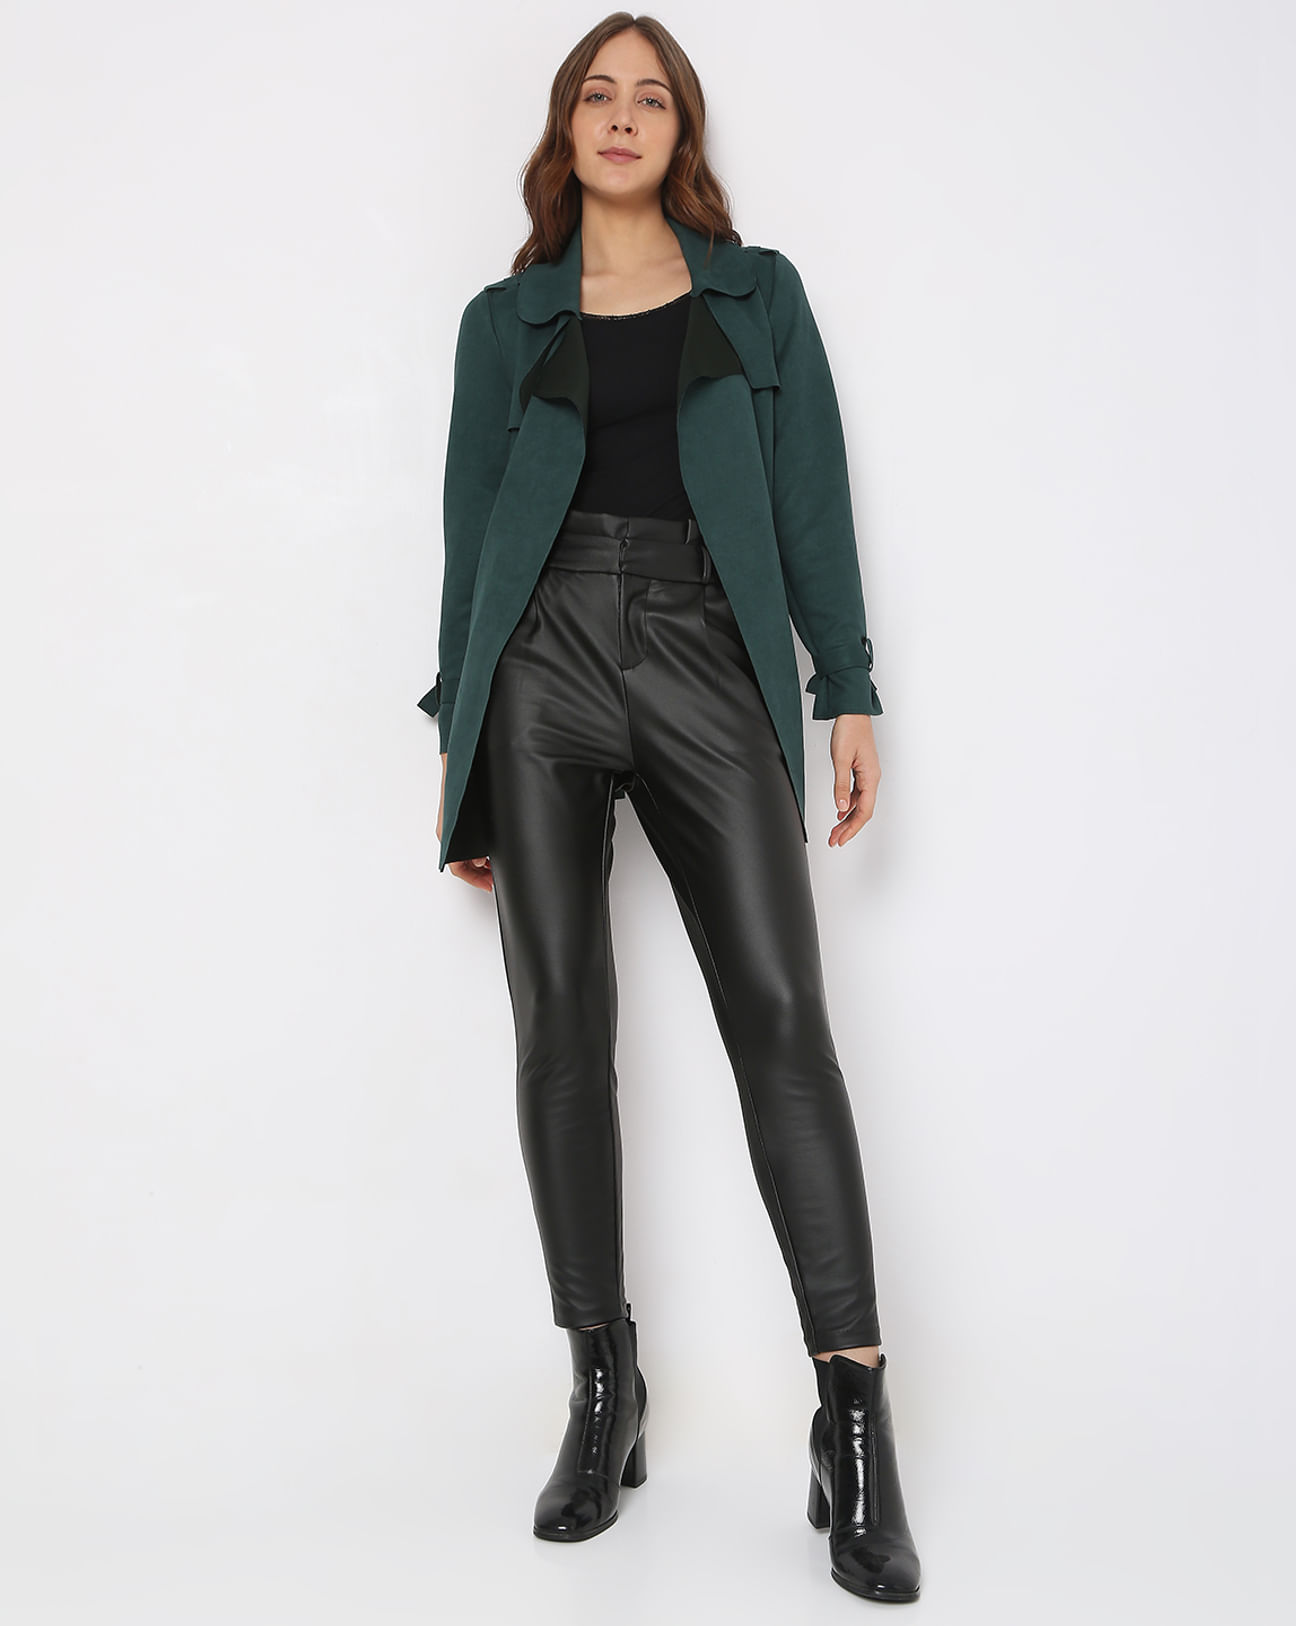 Faux Leather Pants With Contrast Binding  Red leather pants, Leather pants  women, Black leather pants